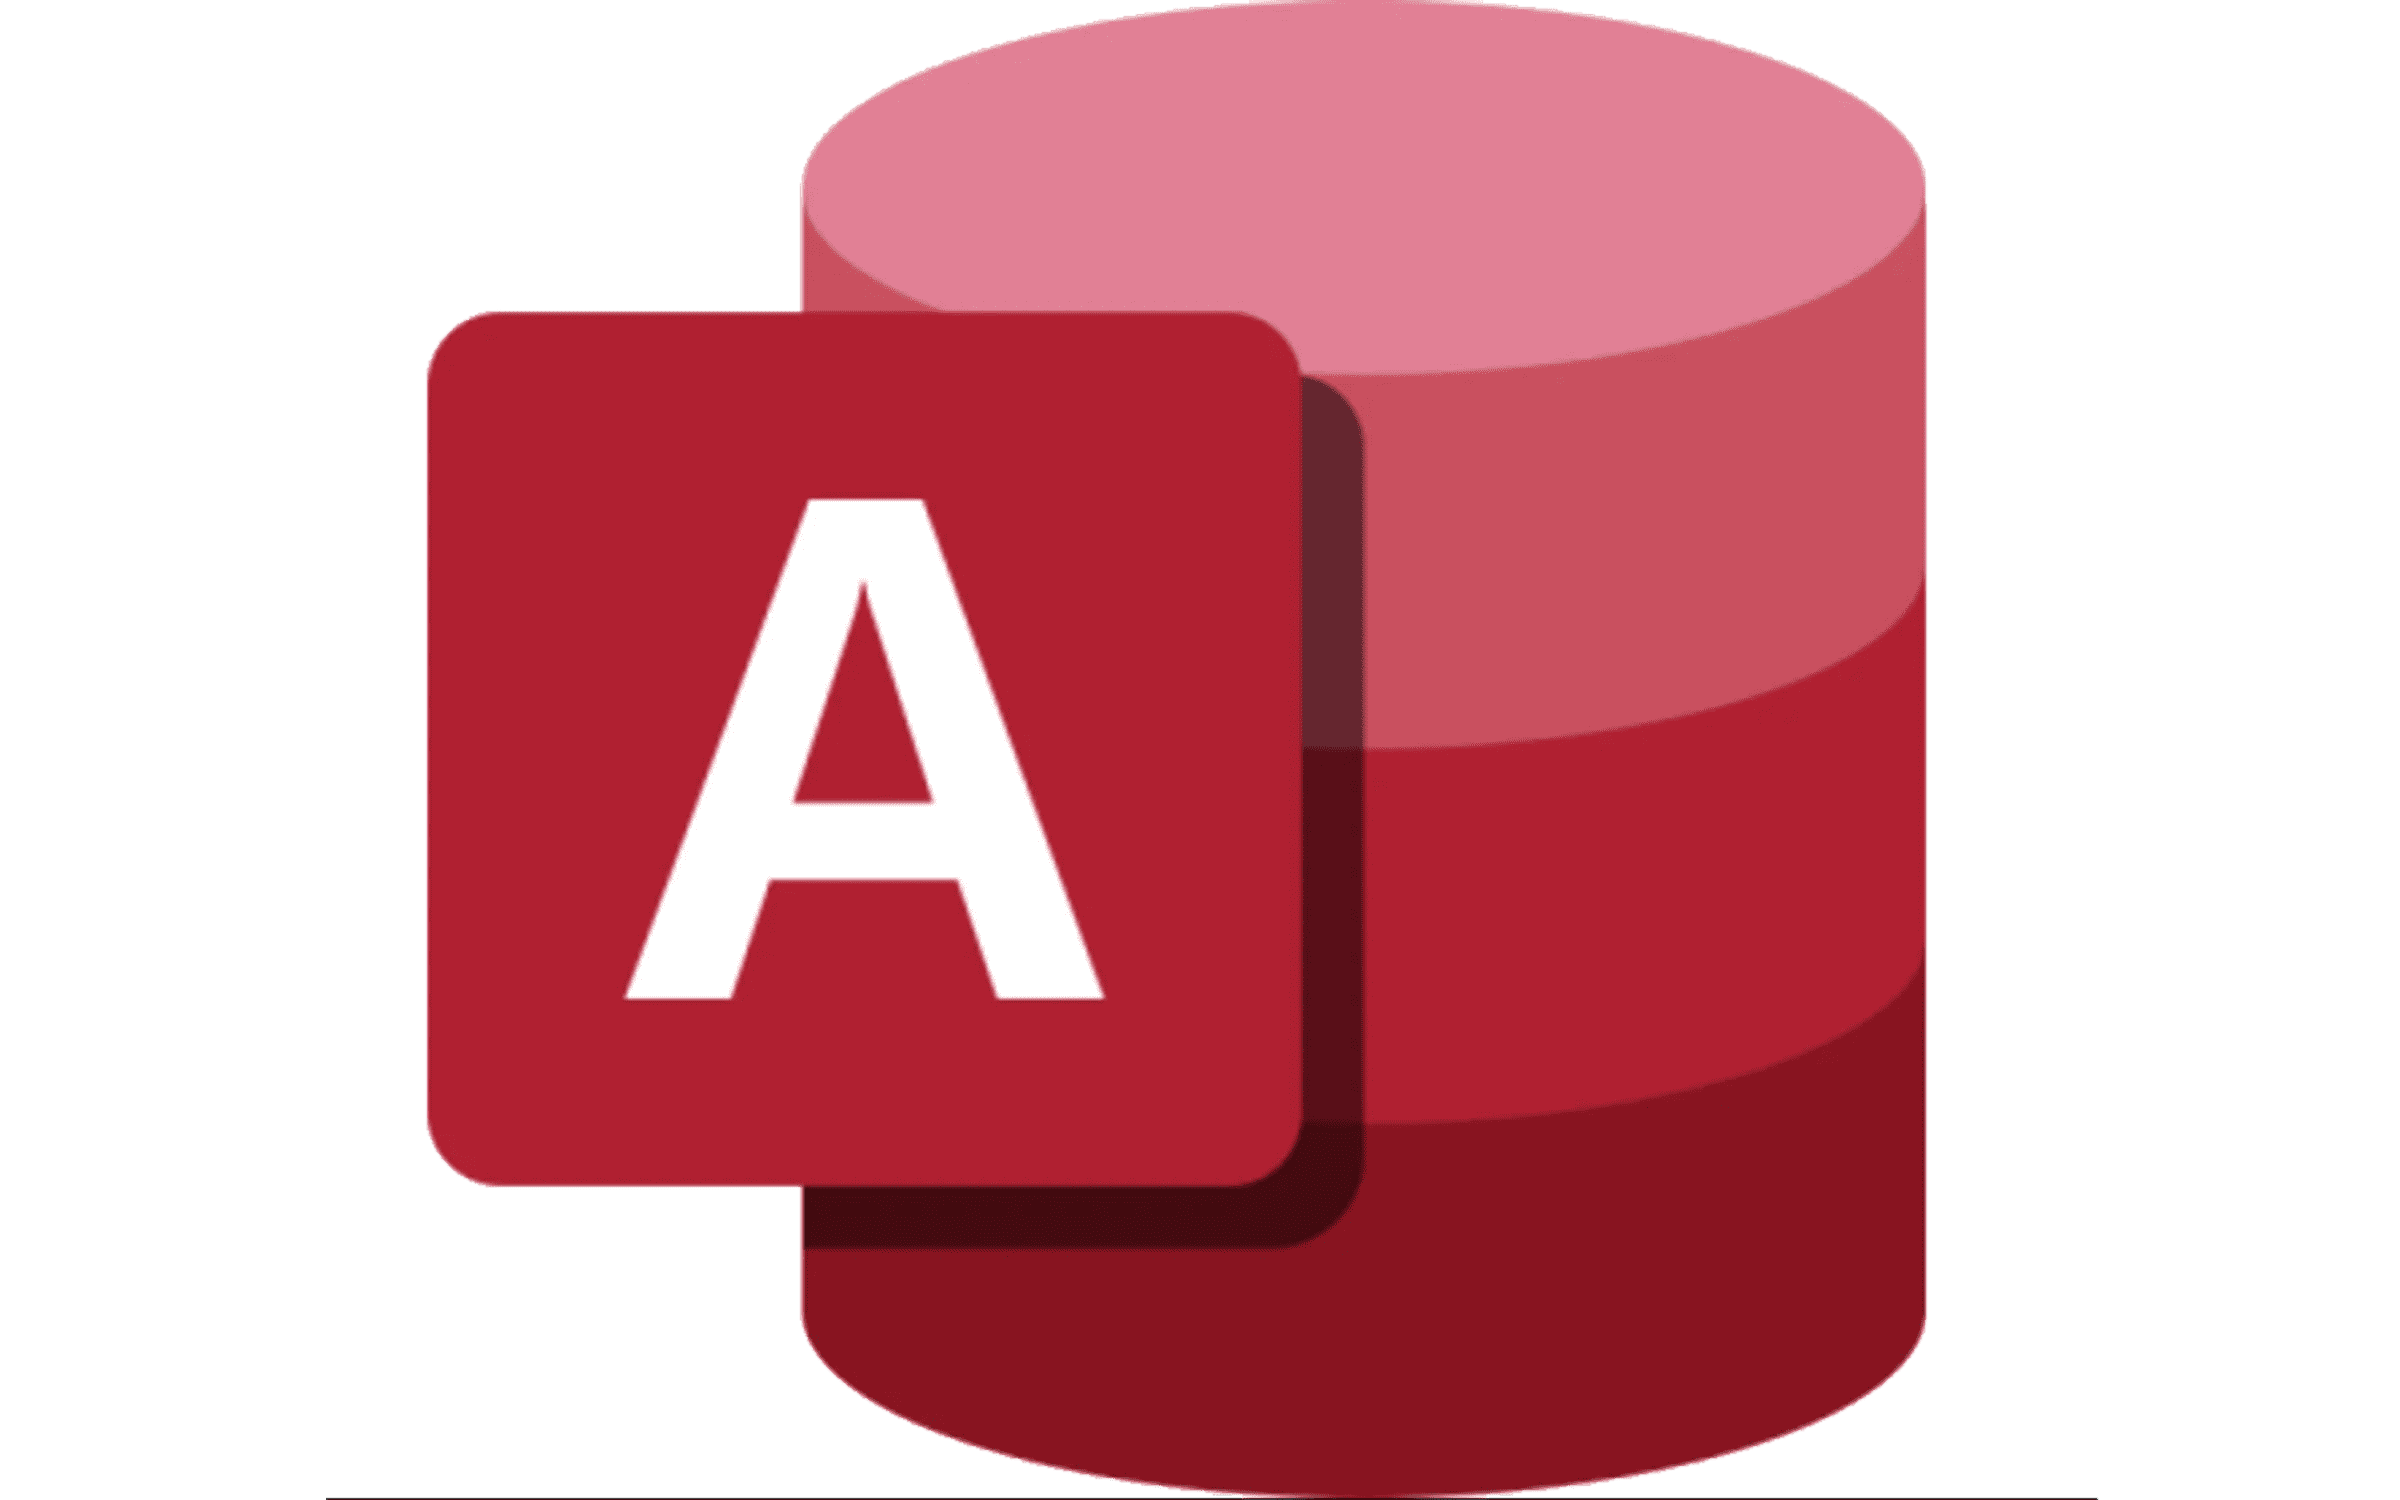 microsoft access for mac free download full version crack